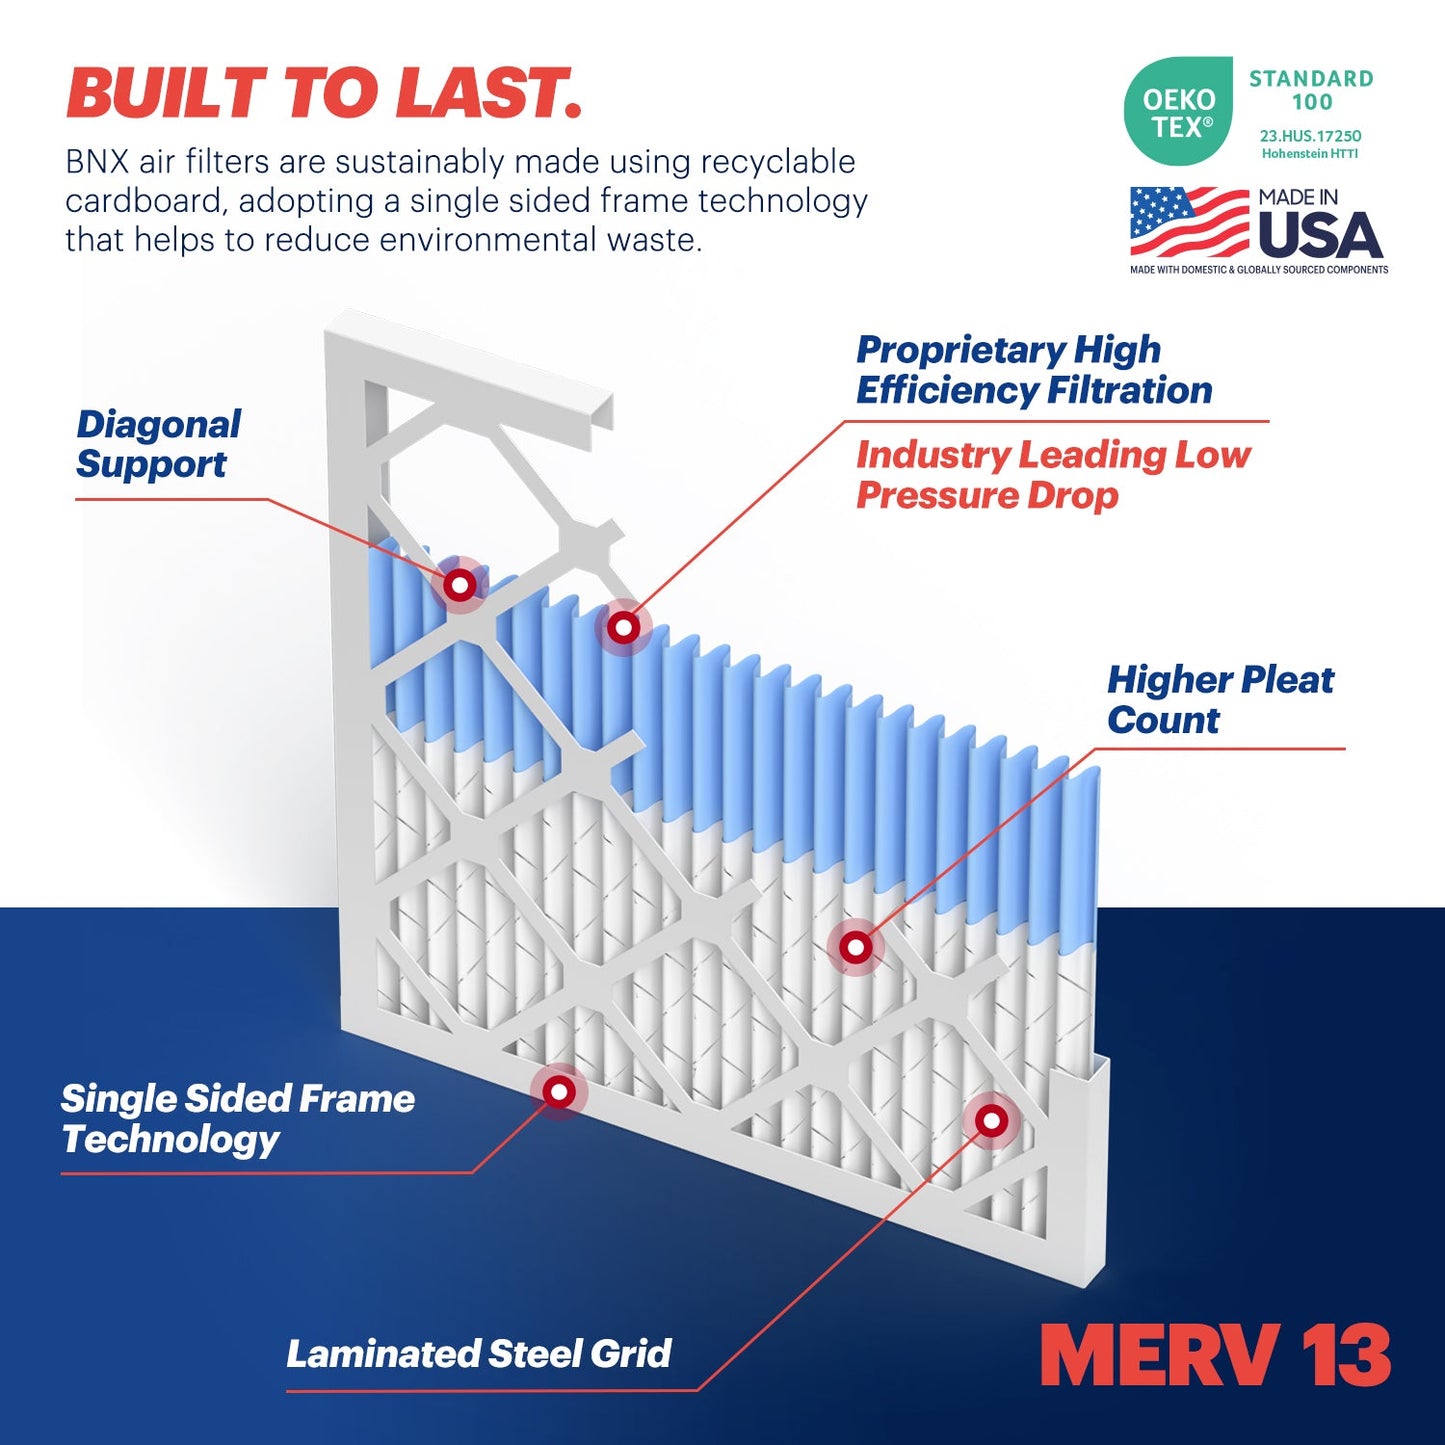 BNX TruFilter 20x25x1 MERV 13 Pleated Air Filter – Made in USA (6-Pack)